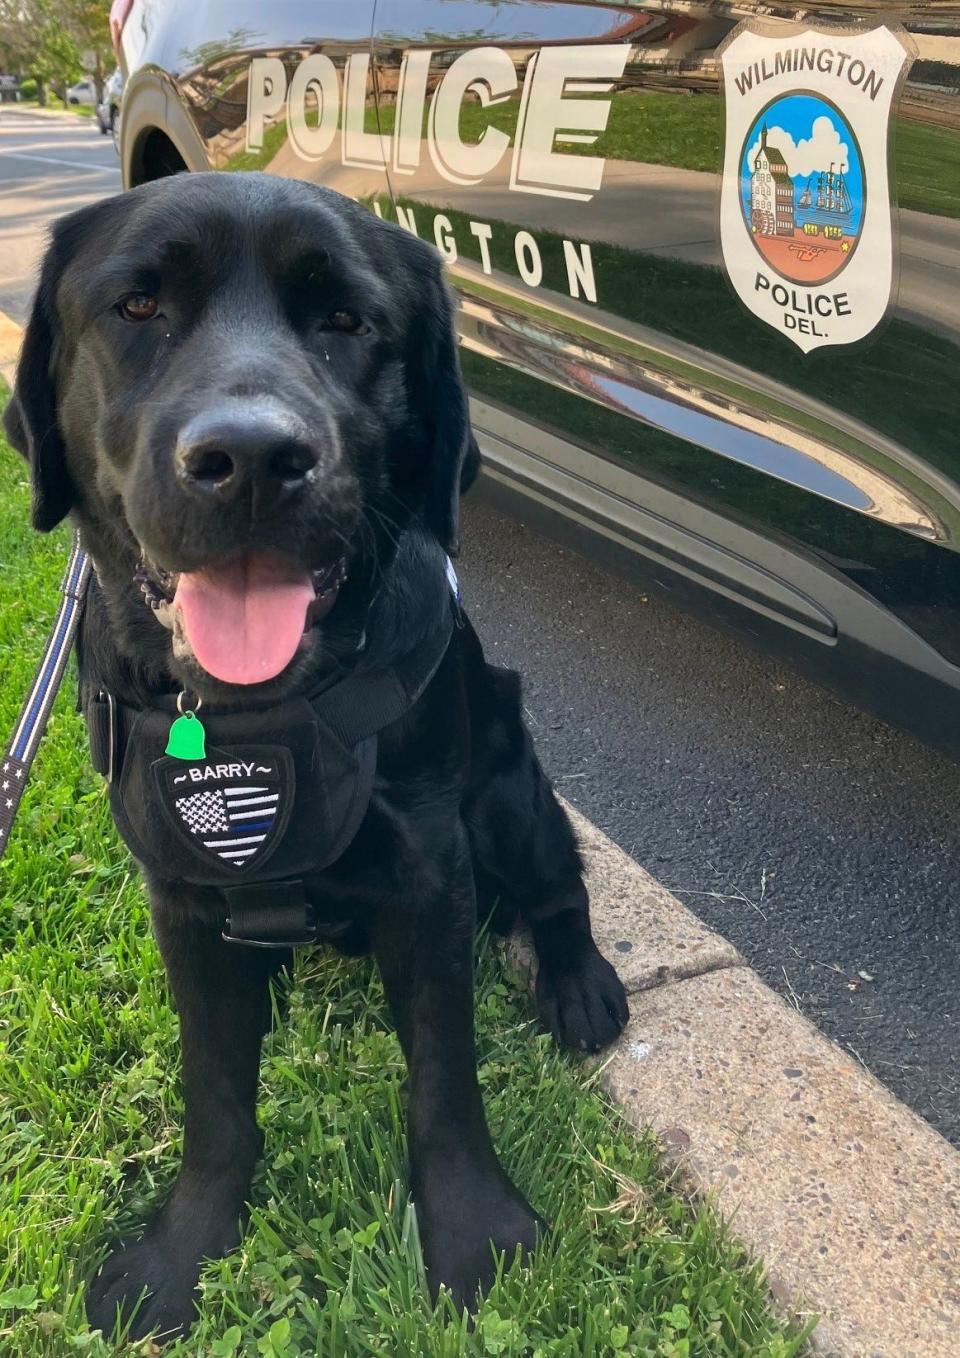 Barry is the Wilmington Police Department's new Trauma and Wellness Dog.